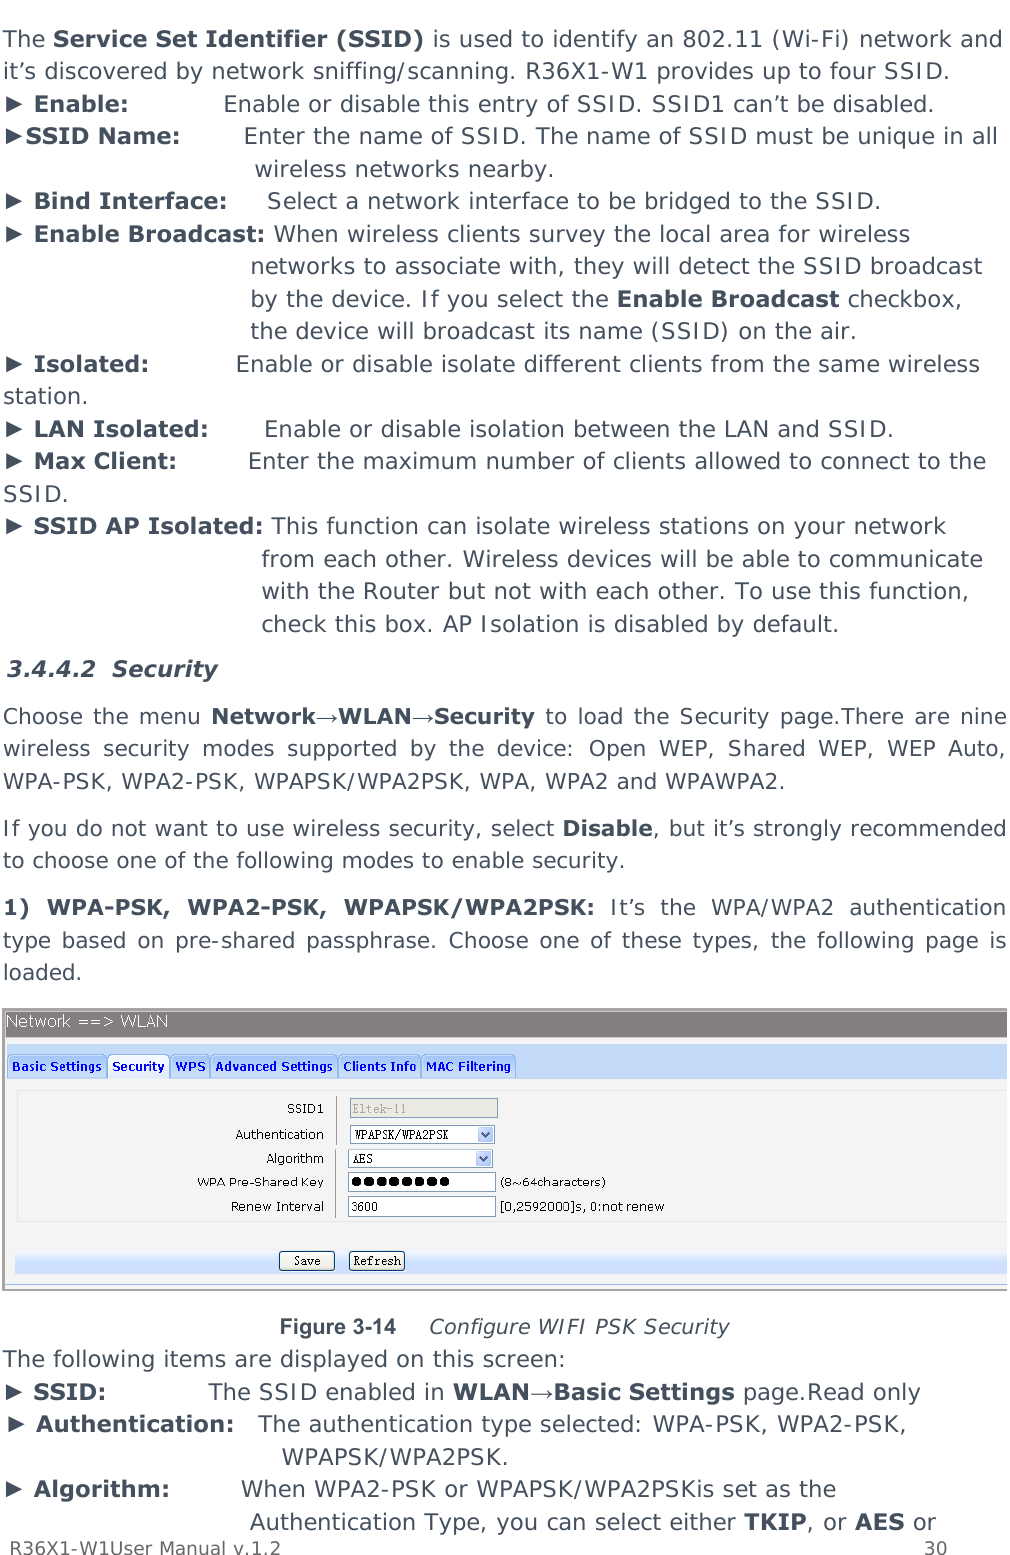           R36X1-W1User Manual v.1.2    30  The Service Set Identifier (SSID) is used to identify an 802.11 (Wi-Fi) network and it’s discovered by network sniffing/scanning. R36X1-W1 provides up to four SSID. ► Enable:            Enable or disable this entry of SSID. SSID1 can’t be disabled. ►SSID Name:        Enter the name of SSID. The name of SSID must be unique in all wireless networks nearby. ► Bind Interface:     Select a network interface to be bridged to the SSID. ► Enable Broadcast: When wireless clients survey the local area for wireless networks to associate with, they will detect the SSID broadcast by the device. If you select the Enable Broadcast checkbox, the device will broadcast its name (SSID) on the air. ► Isolated:           Enable or disable isolate different clients from the same wireless station. ► LAN Isolated:       Enable or disable isolation between the LAN and SSID. ► Max Client:         Enter the maximum number of clients allowed to connect to the SSID. ► SSID AP Isolated: This function can isolate wireless stations on your network from each other. Wireless devices will be able to communicate with the Router but not with each other. To use this function, check this box. AP Isolation is disabled by default. 3.4.4.2 Security Choose the menu Network→WLAN→Security to load the Security page.There are nine wireless security modes supported by the device: Open WEP, Shared WEP, WEP Auto, WPA-PSK, WPA2-PSK, WPAPSK/WPA2PSK, WPA, WPA2 and WPAWPA2.  If you do not want to use wireless security, select Disable, but it’s strongly recommended to choose one of the following modes to enable security. 1) WPA-PSK, WPA2-PSK, WPAPSK/WPA2PSK: It’s the WPA/WPA2 authentication type based on pre-shared passphrase. Choose one of these types, the following page is loaded.  Figure 3-14  Configure WIFI PSK Security The following items are displayed on this screen: ► SSID:             The SSID enabled in WLAN→Basic Settings page.Read only ► Authentication:   The authentication type selected: WPA-PSK, WPA2-PSK, WPAPSK/WPA2PSK. ► Algorithm:         When WPA2-PSK or WPAPSK/WPA2PSKis set as the Authentication Type, you can select either TKIP, or AES or 